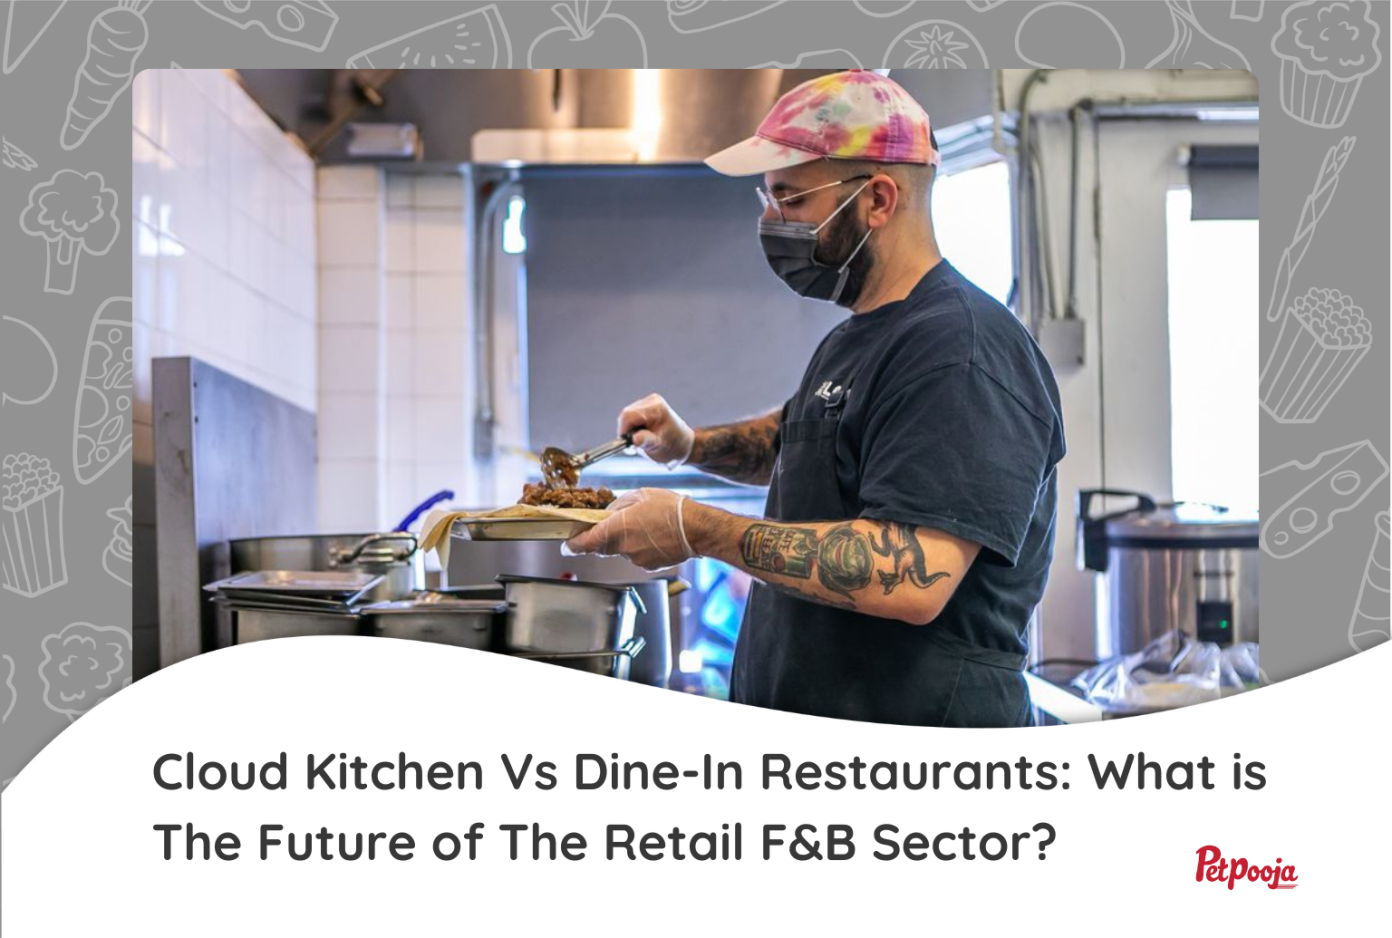 Cloud Kitchen Vs Dine-In Restaurants: What is The Future of The Retail F&B sector?